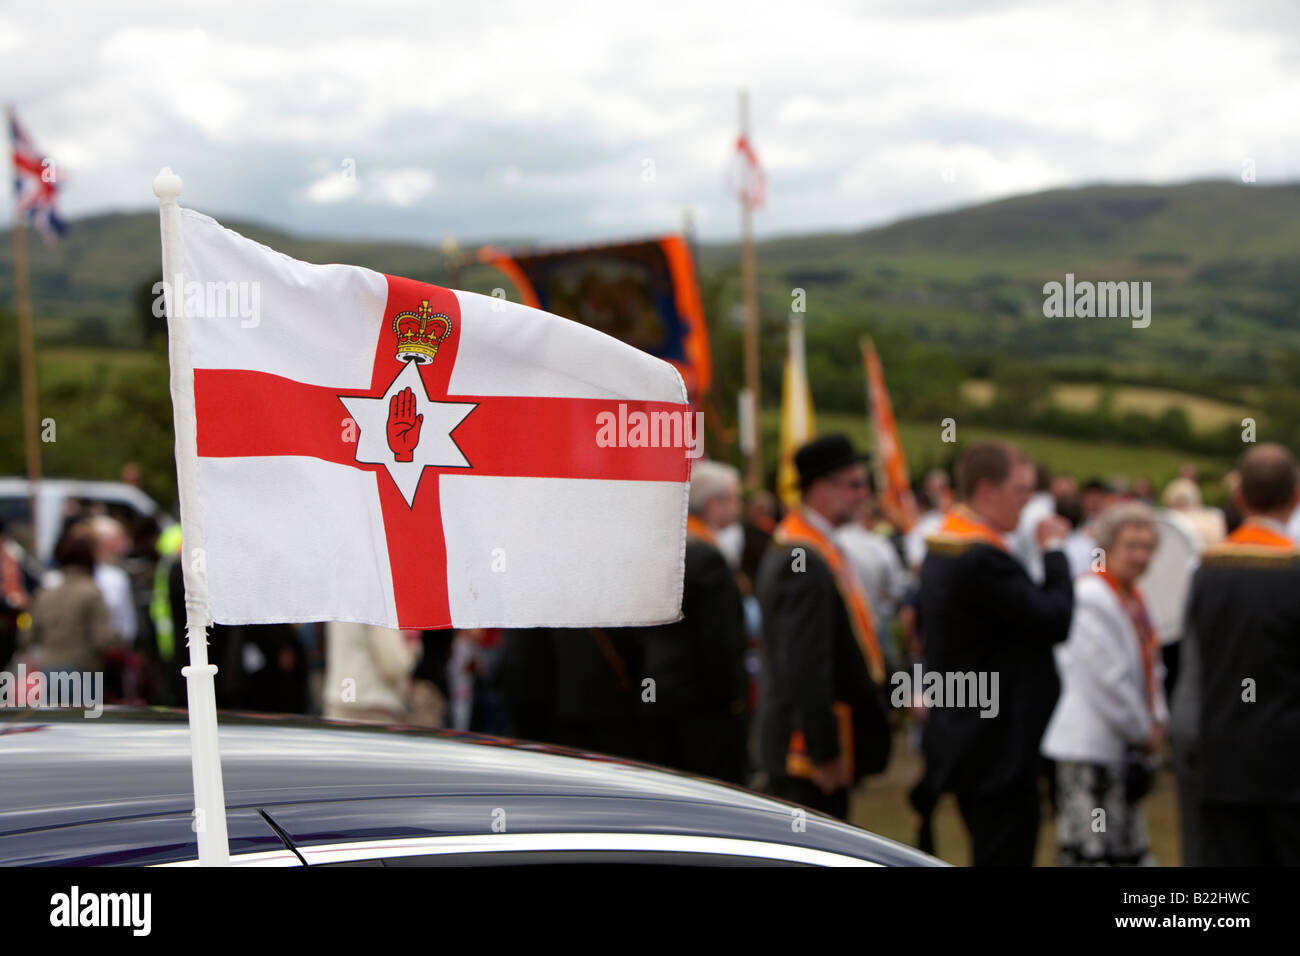 northern ireland ulster flag flying above car during 12th July Orangefest celebrations in Dromara county down northern ireland Stock Photo